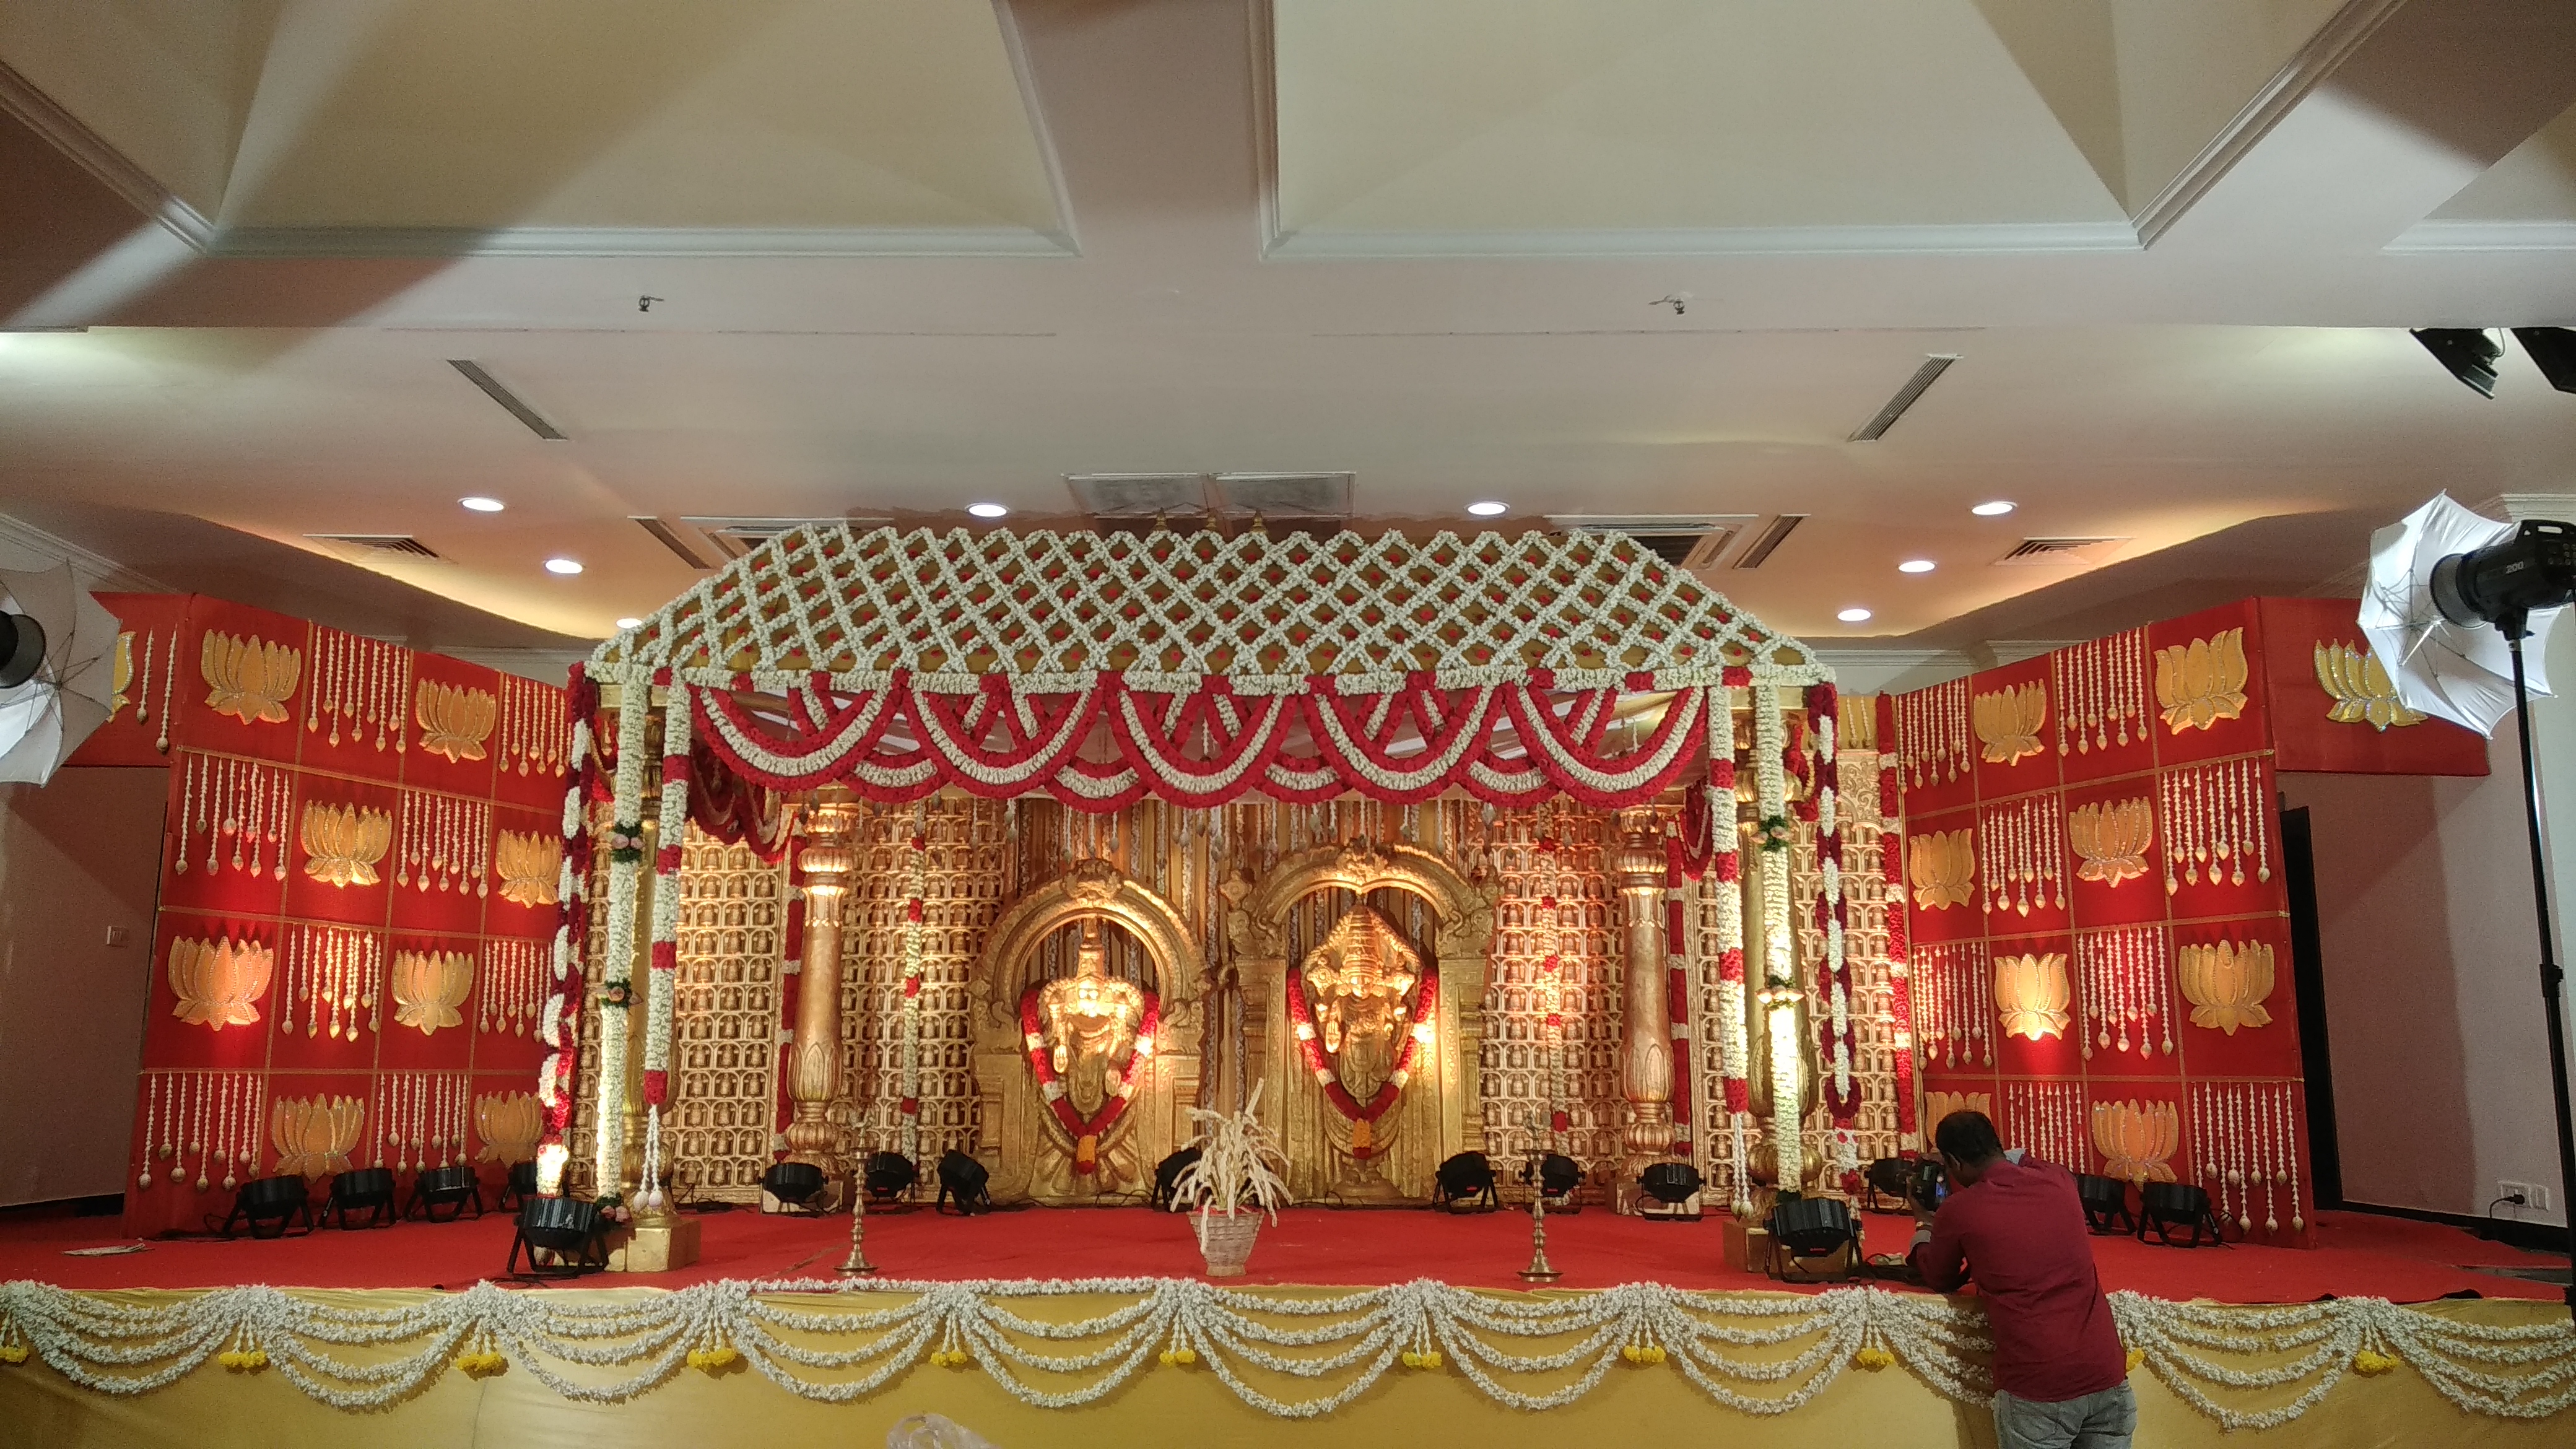 South Indian Wedding Decoration Images South Indian Wedding Entrance Decoration Mandap 